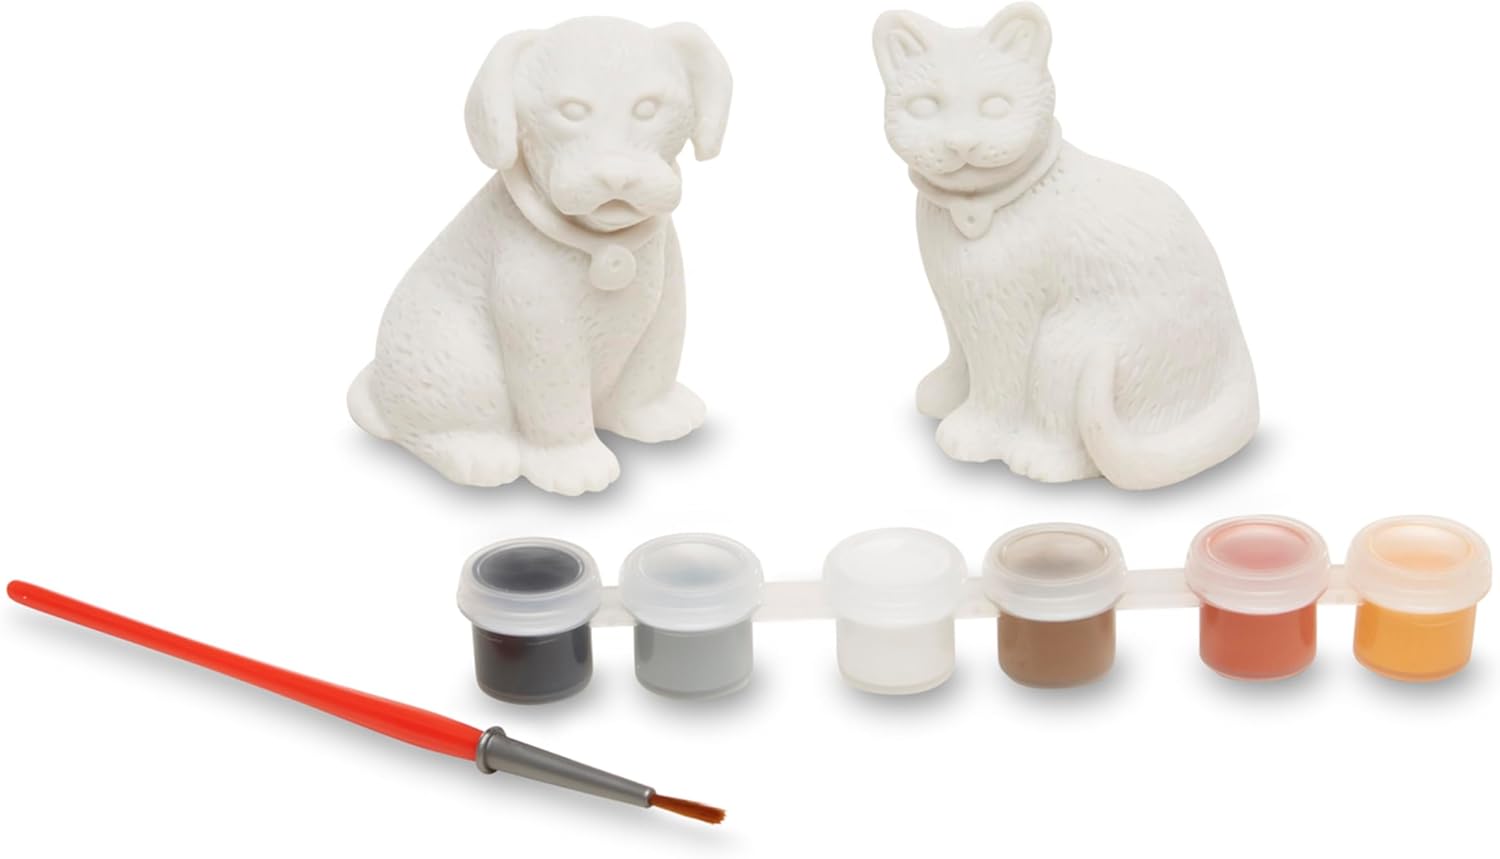 Created By Me! Pets Figurines Craft Kit